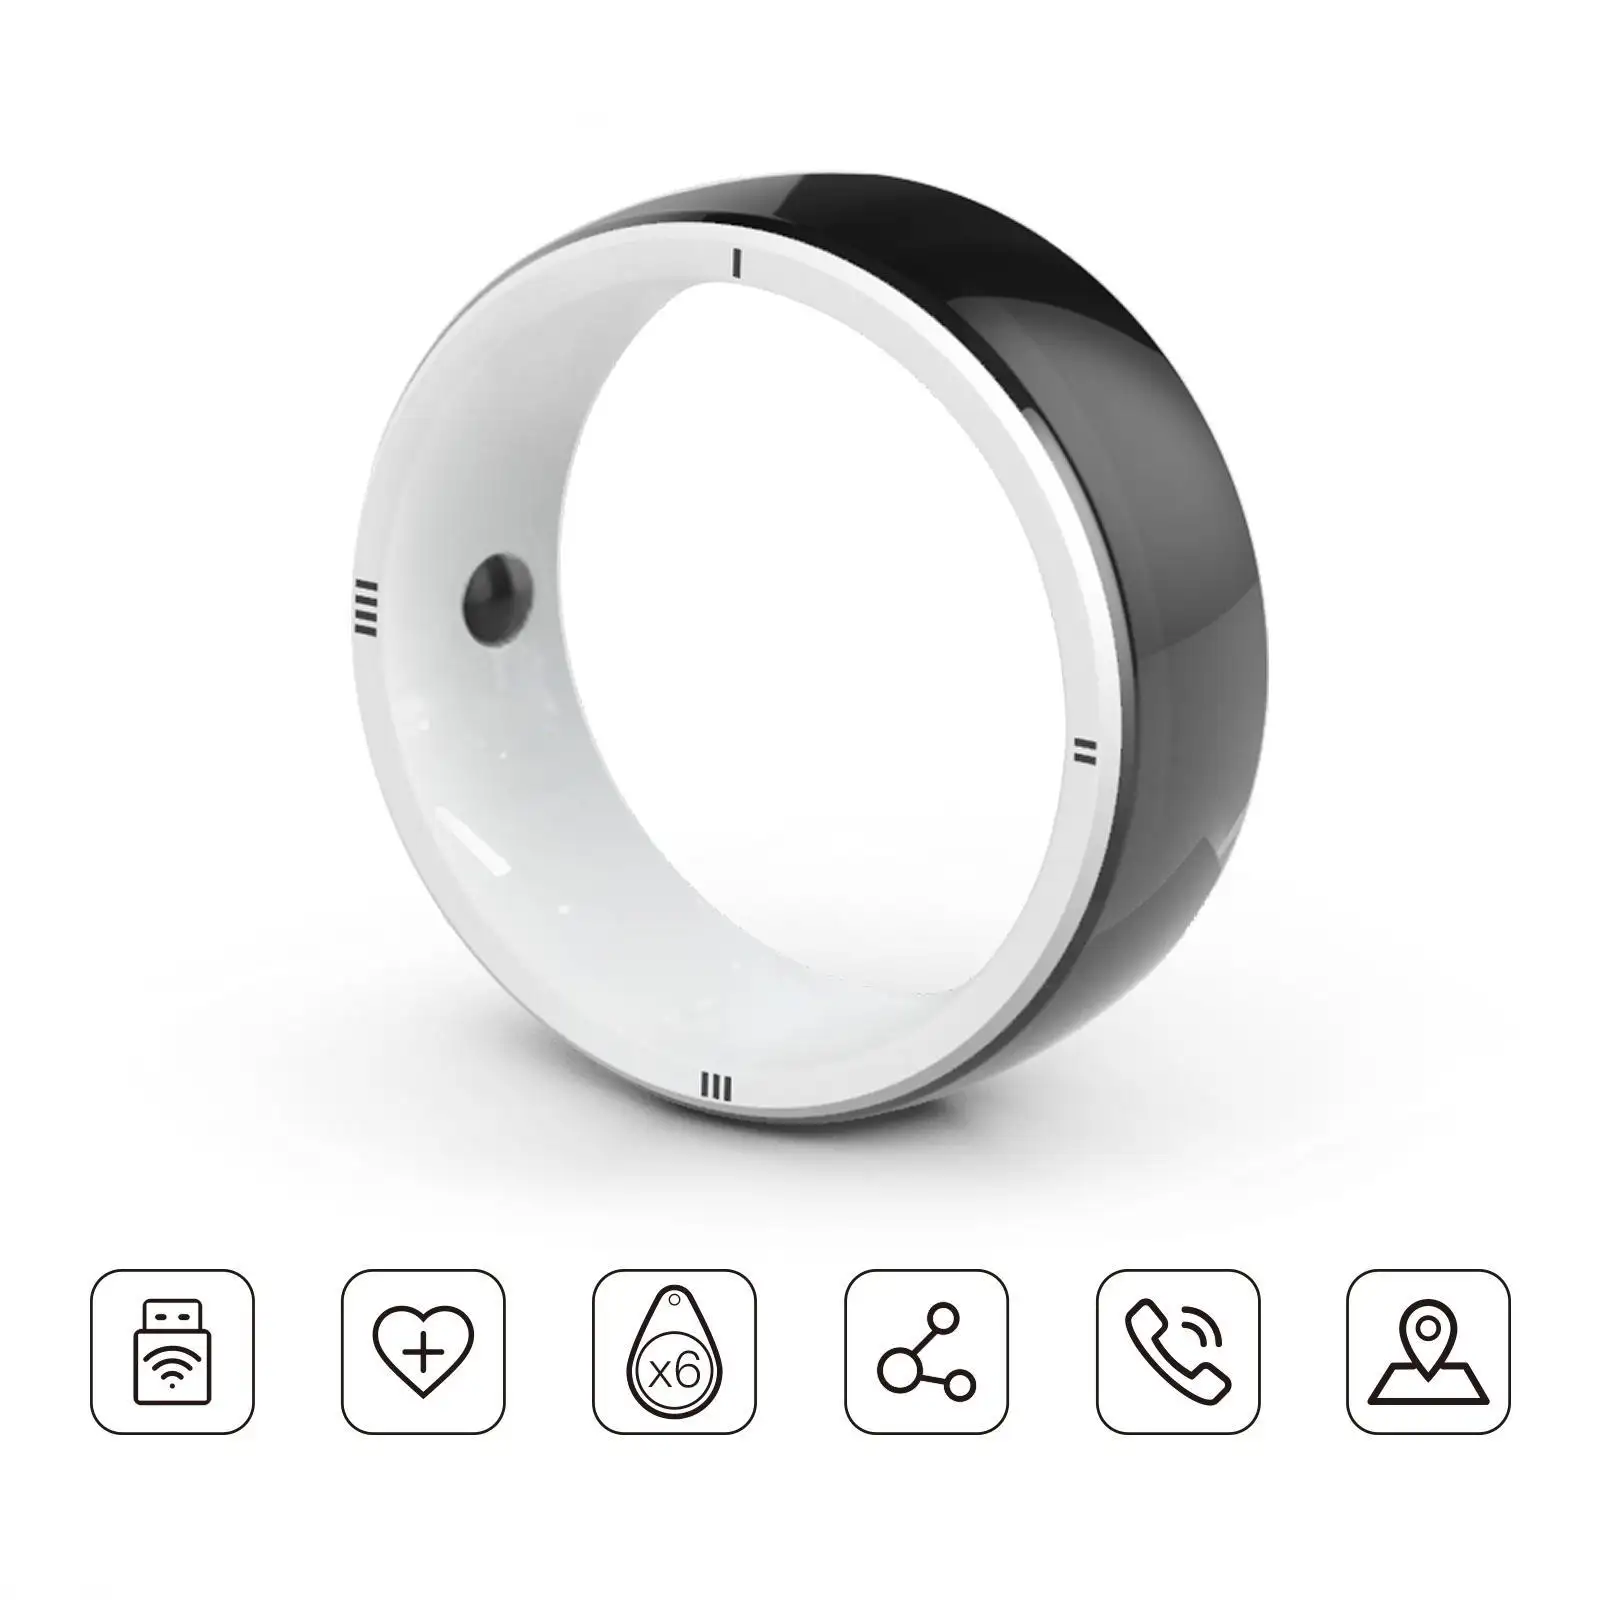 JAKCOM R5 Smart Ring New Smart Ring Best gift with mousepads for gaming homepod wall mount crack key bf 888s battery yagi